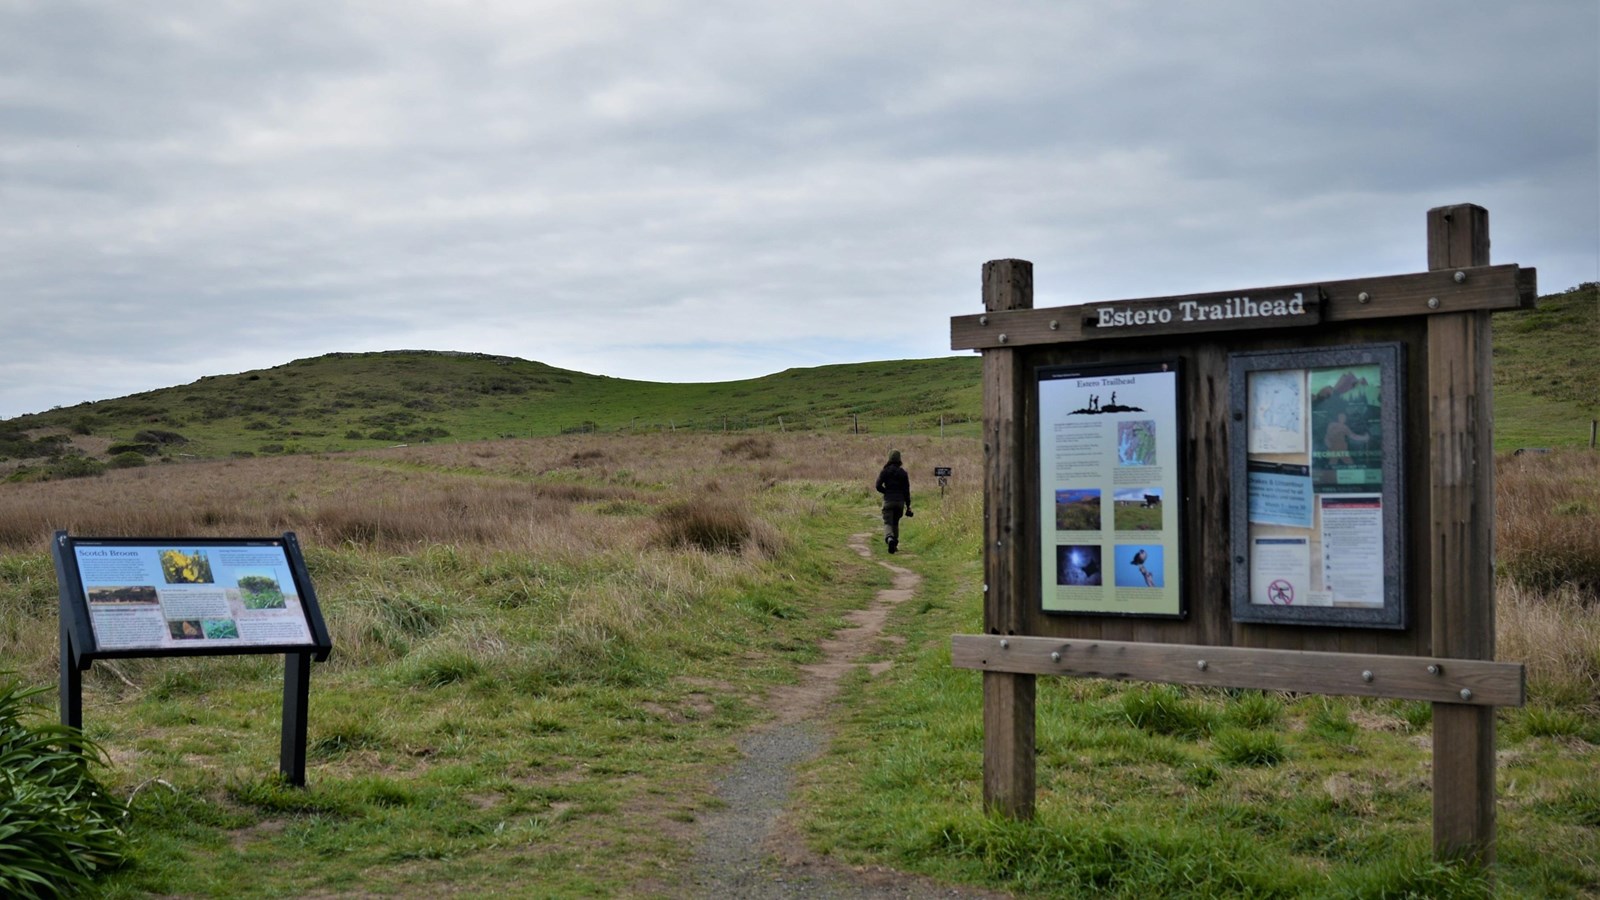 A hiker heads up a dirt trail between two signs under cloudy skies over green grassy hills.